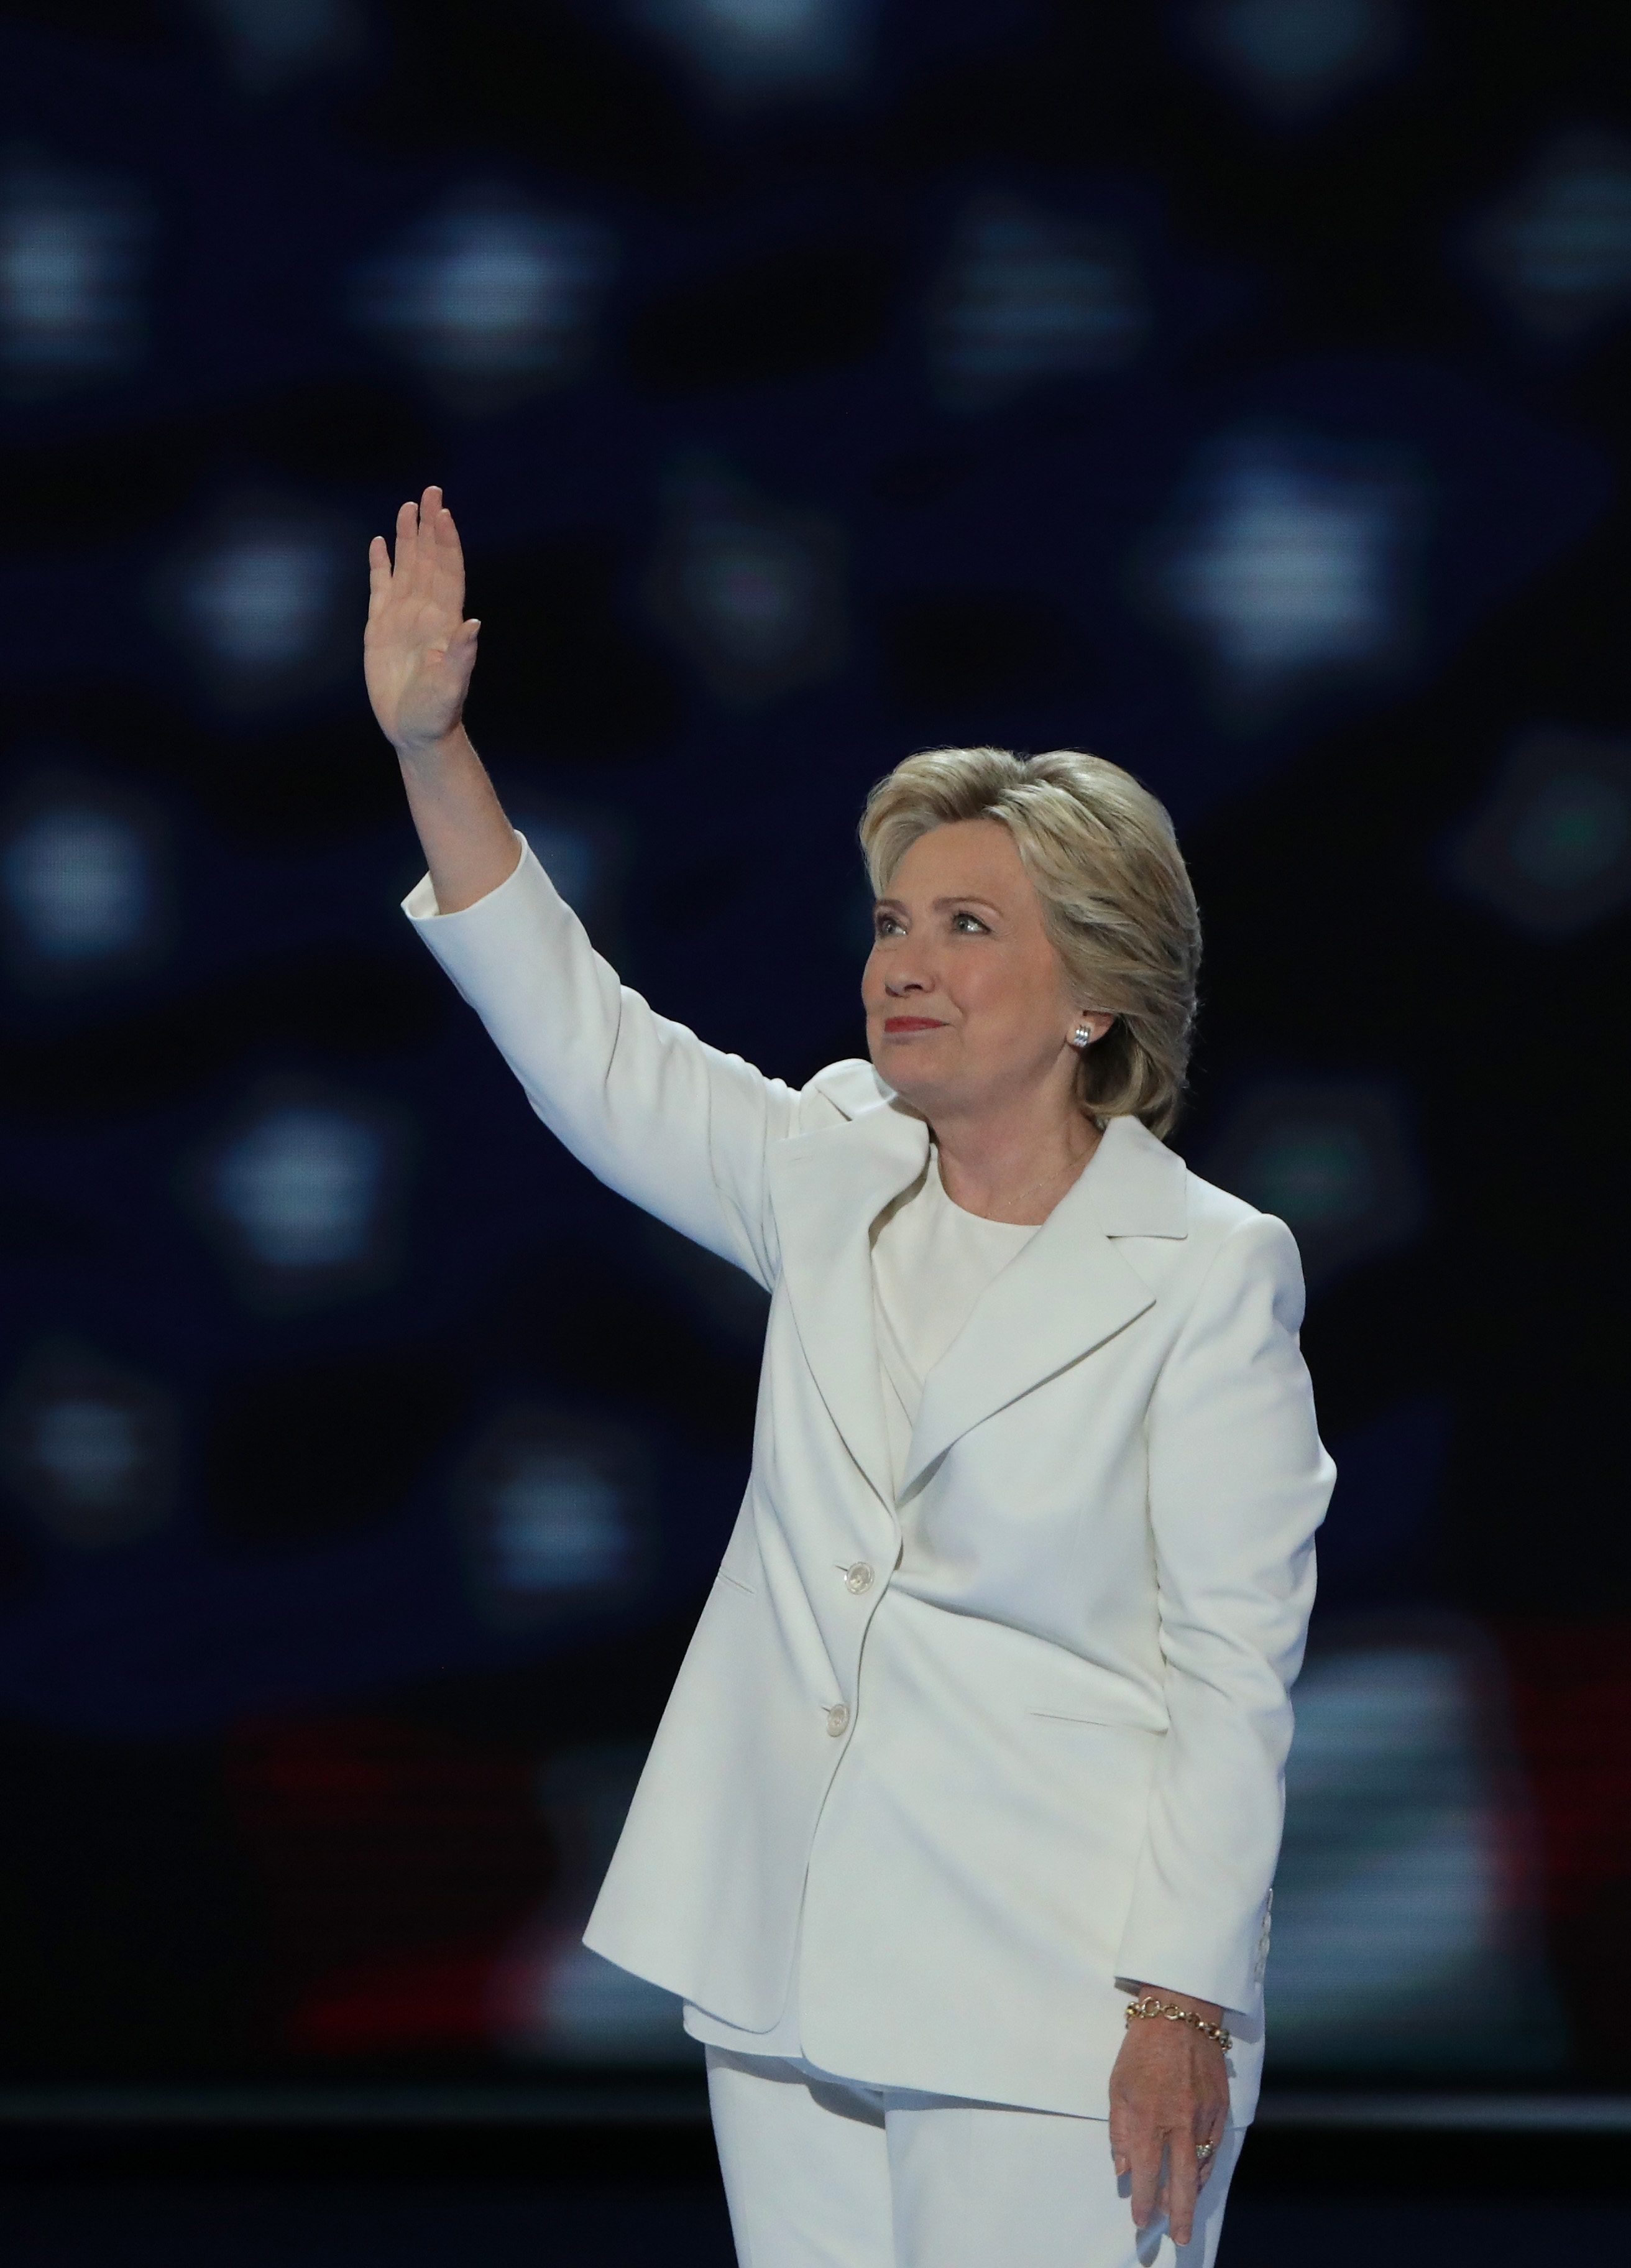 PHILADELPHIA, PA - JULY 28:  Democratic presidential candidate Hillary Clinton acknowledges the crowd as she arrives on stage during the fourth day of the Democratic National Convention at the Wells Fargo Center, July 28, 2016 in Philadelphia, Pennsylvania. Democratic presidential candidate Hillary Clinton received the number of votes needed to secure the party's nomination. An estimated 50,000 people are expected in Philadelphia, including hundreds of protesters and members of the media. The four-day Democratic National Convention kicked off July 25.  (Photo by Alex Wong/Getty Images)